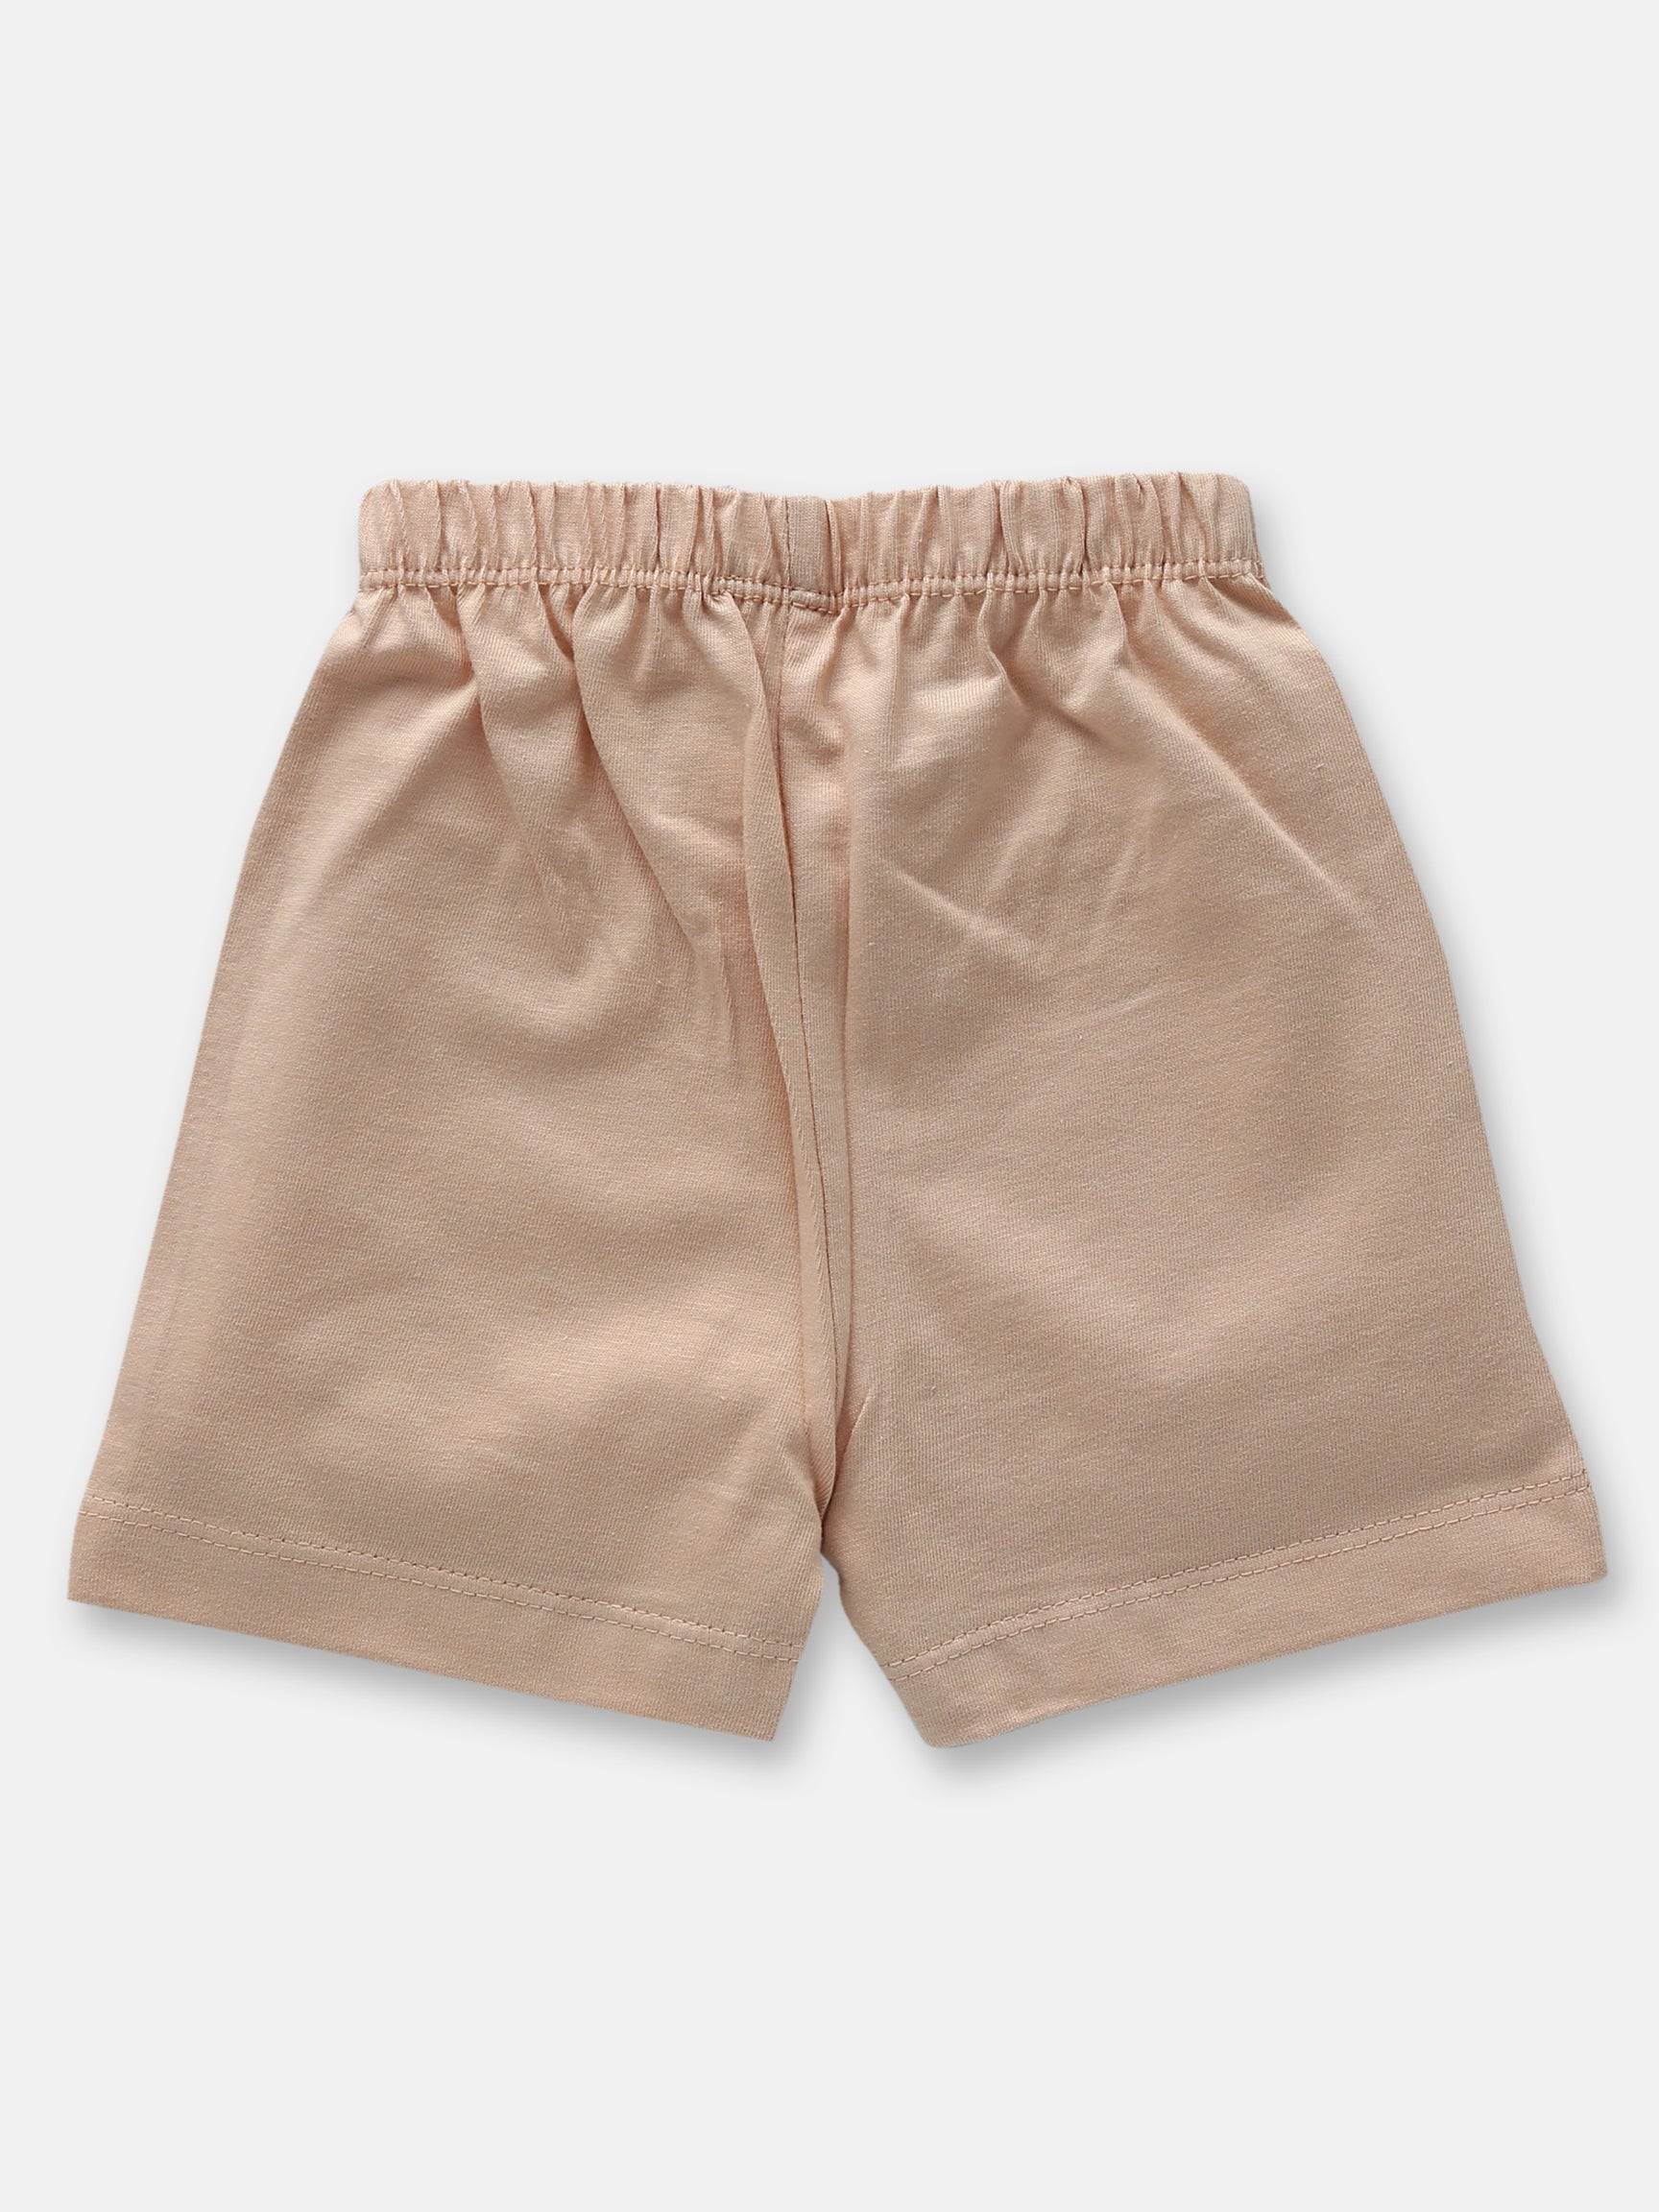 OHMS Boys Casual bottom shorts Pack of 5